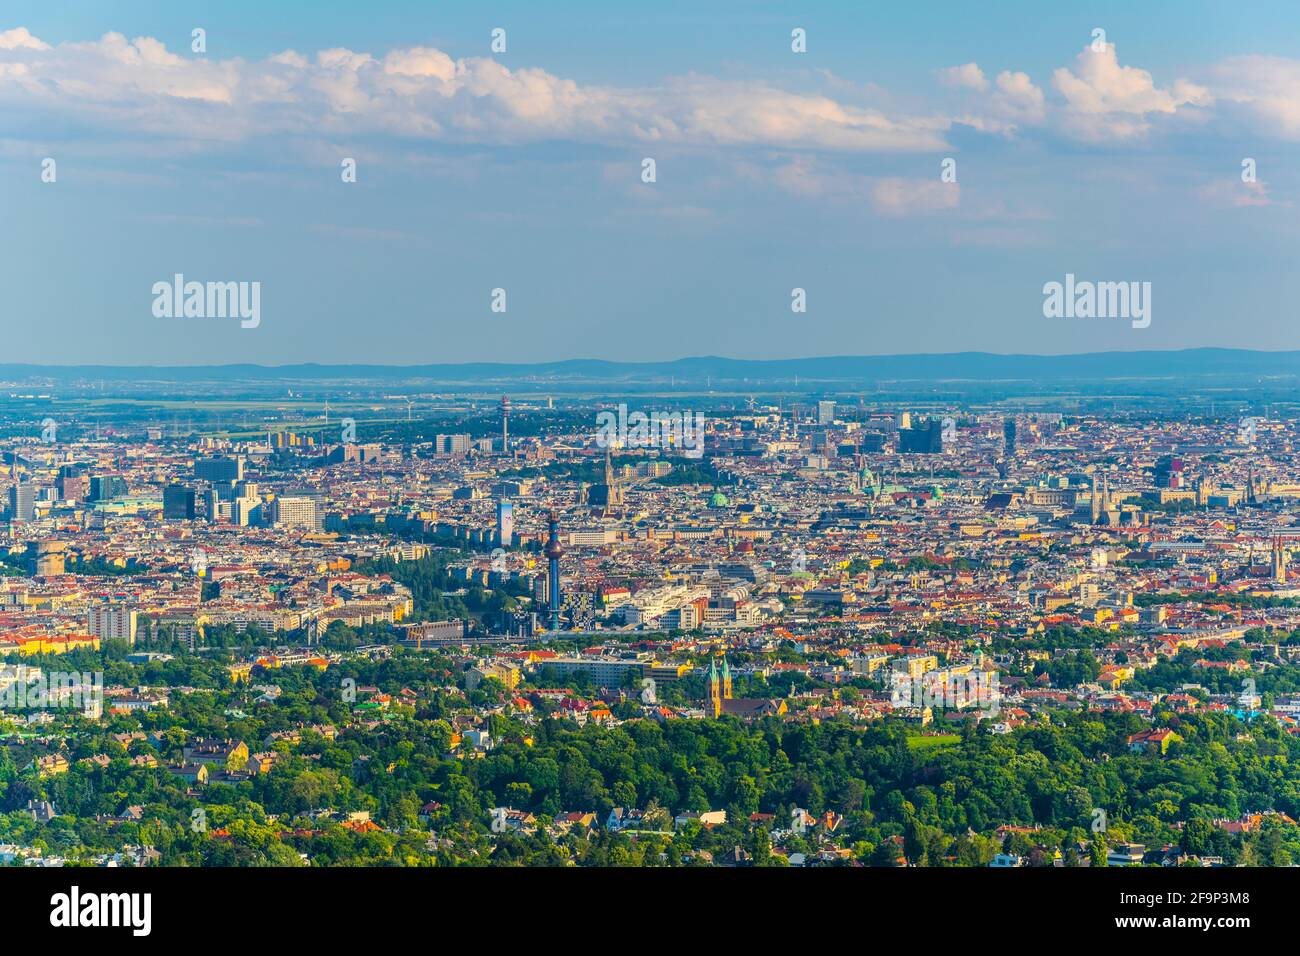 Aerial view of the historical center of vienna including stephamsdom cathedral belvedere palace, karlskirche church and myn other sights from kahlenbe Stock Photo